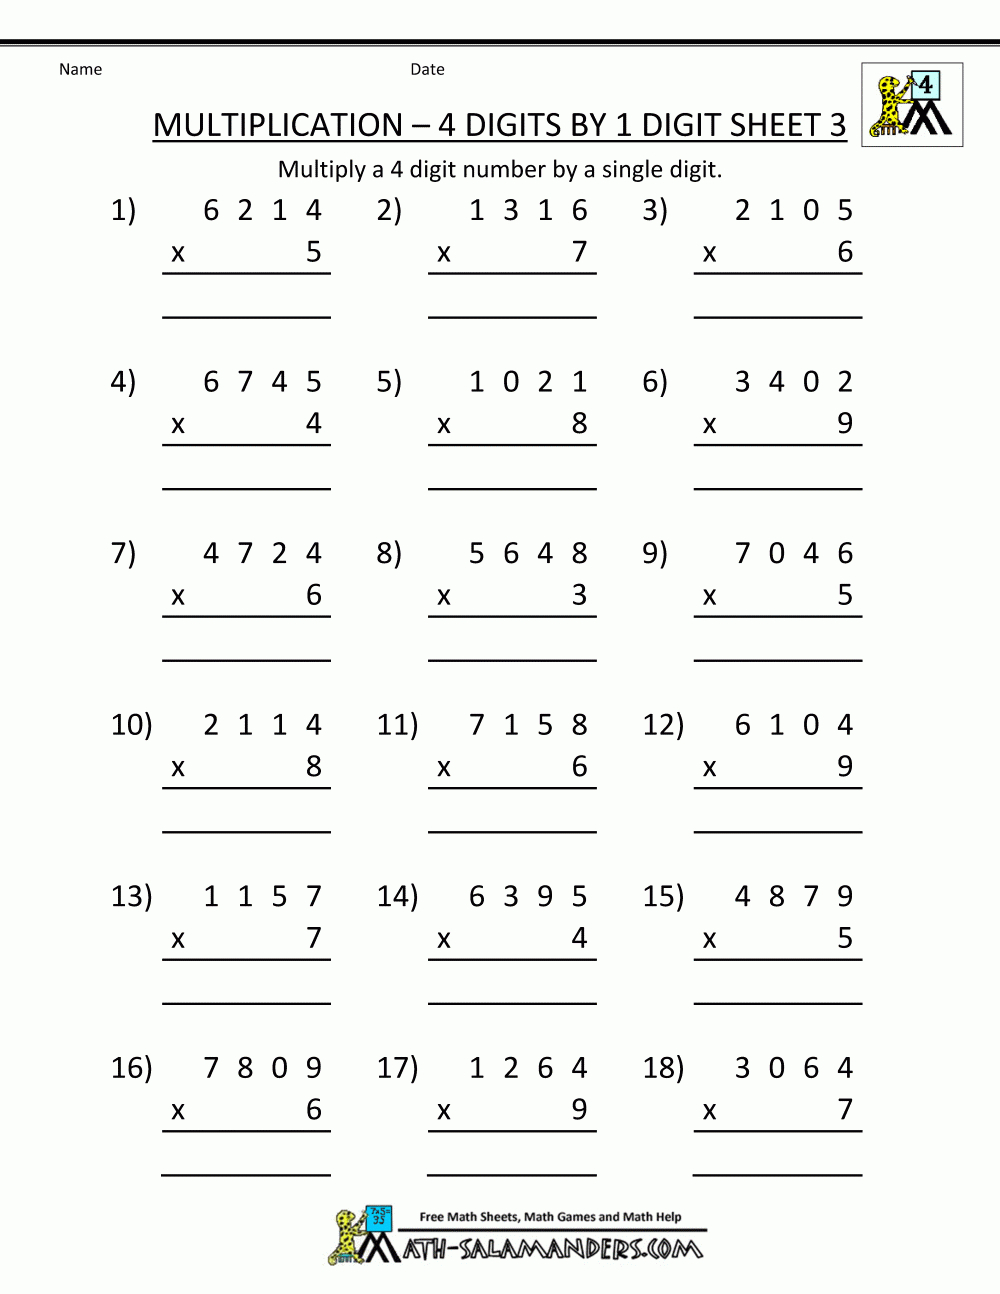 Multiplication Practice Sheets For 3Rd Grade - Google Search pertaining to Free Printable Multiplication Practice Sheets